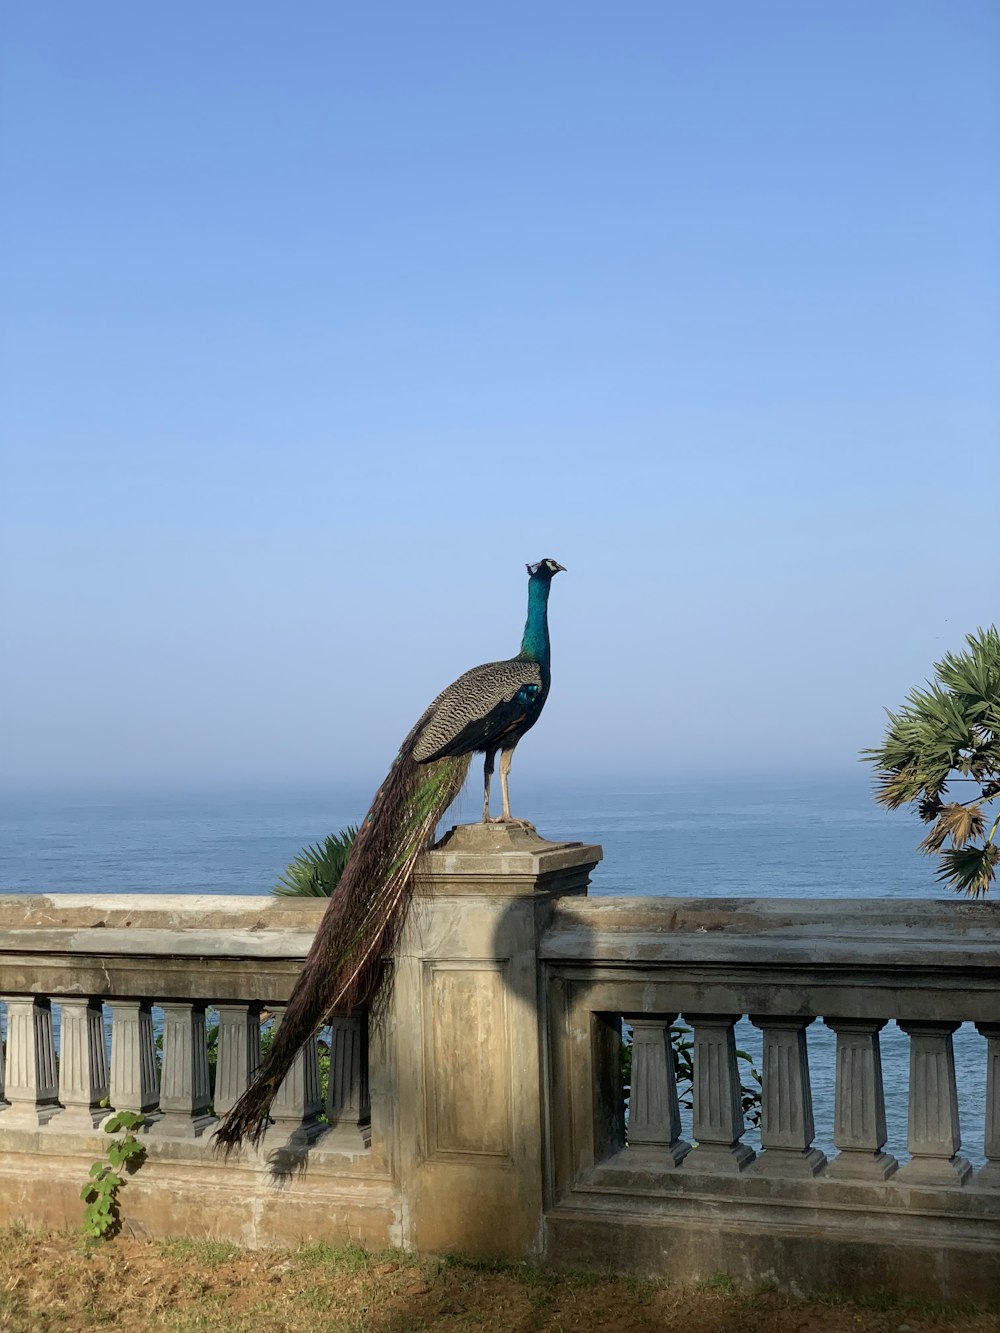 a peacock standing on top of a stone fence next to the ocean